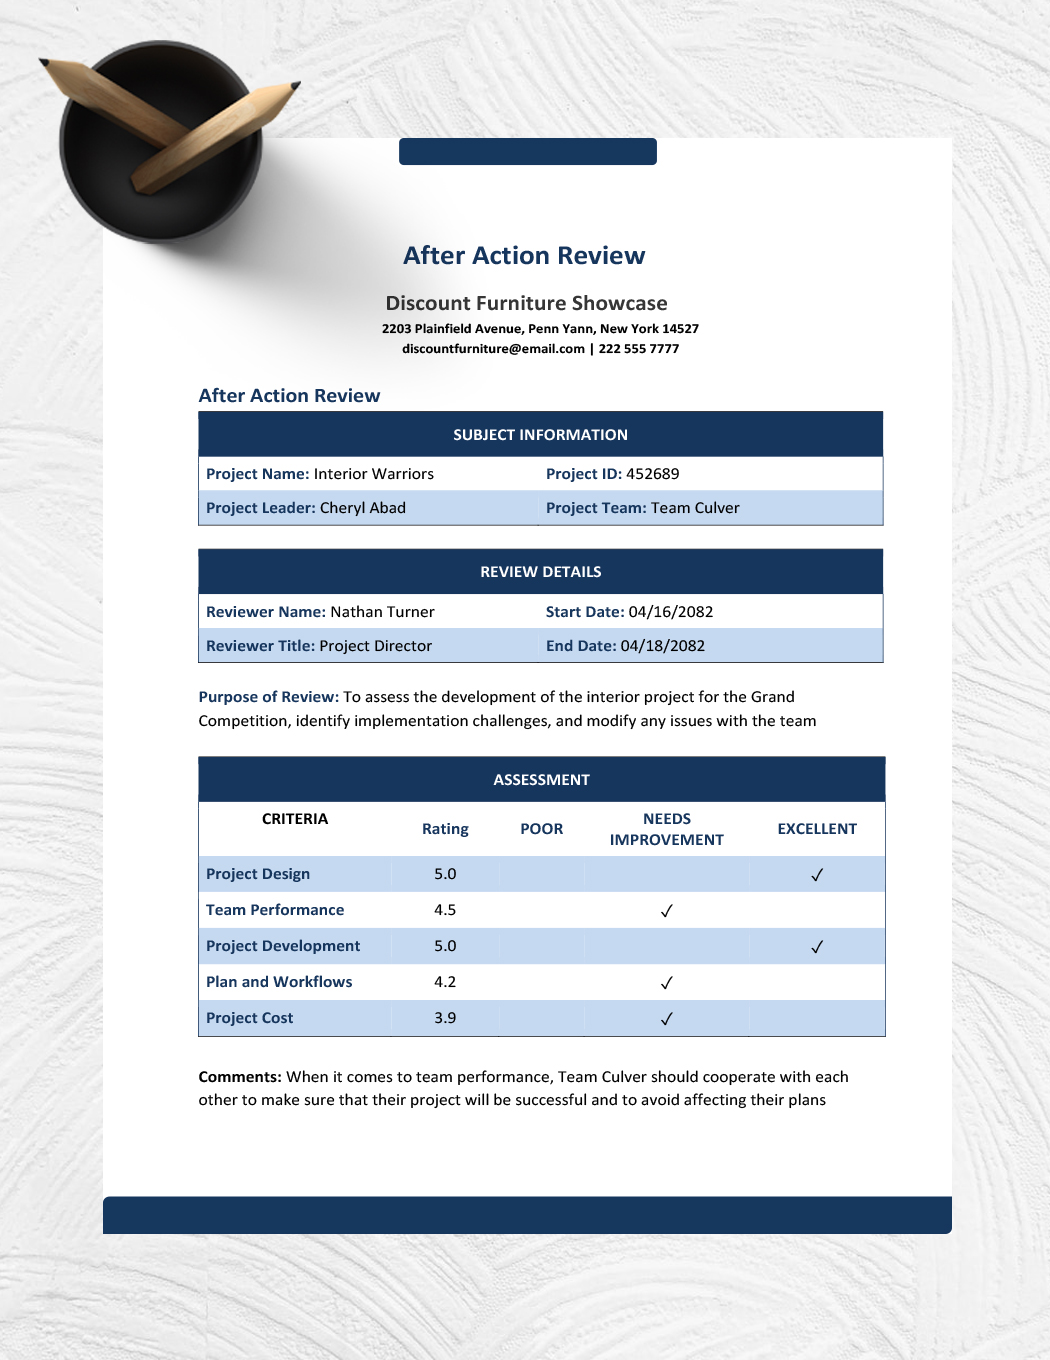 After Action Review Template